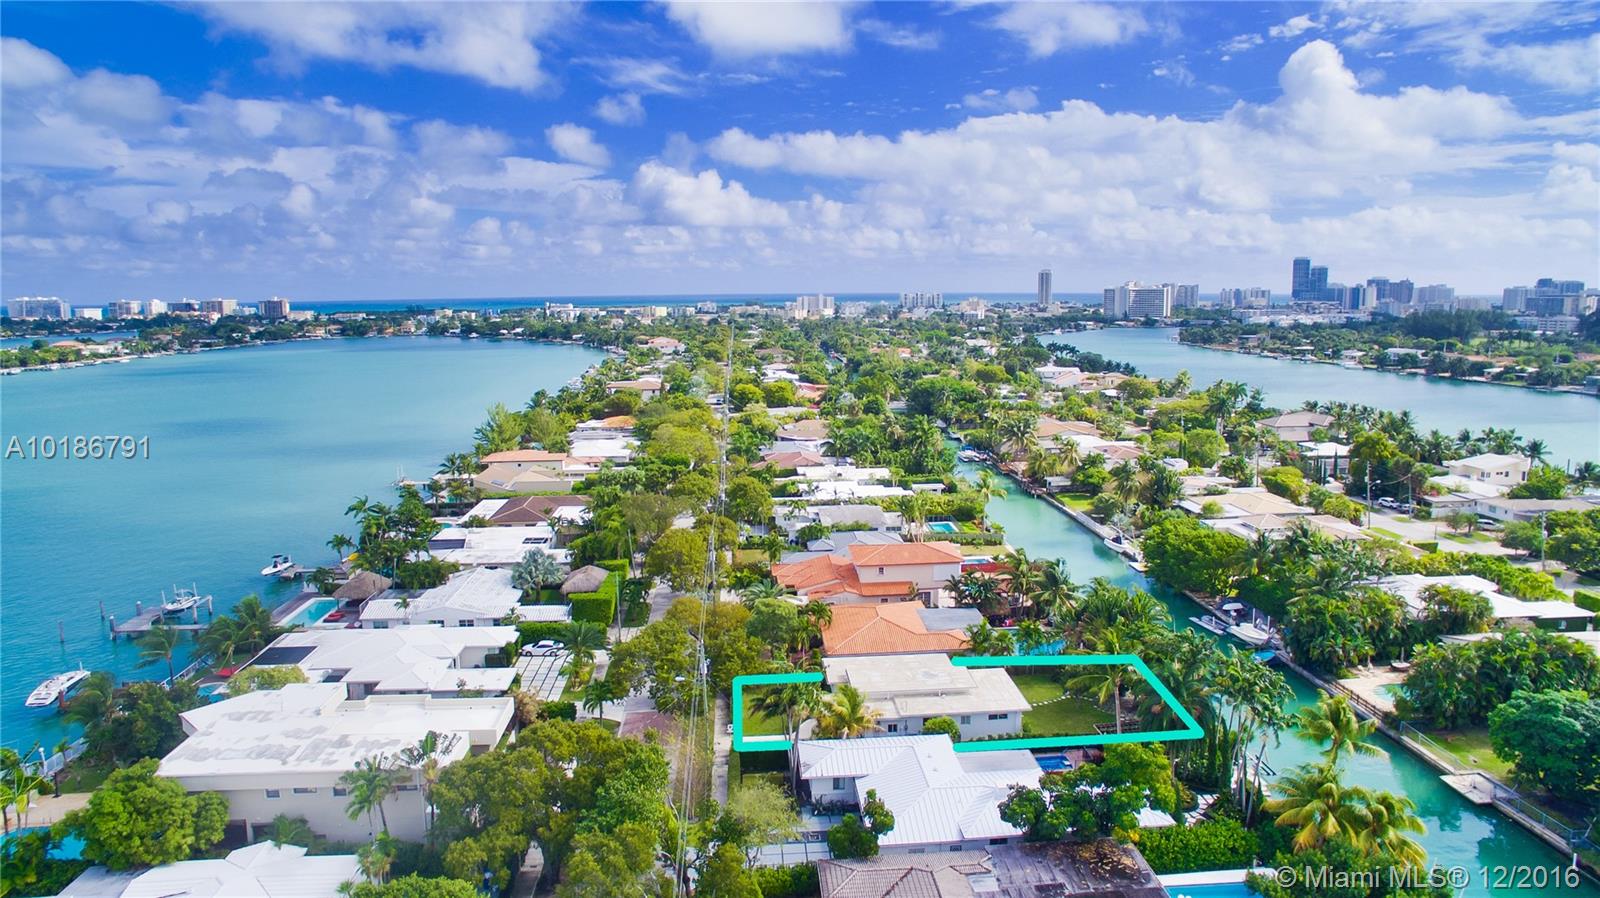 What $1.5 million Buys You in These Miami Beach Neighborhoods